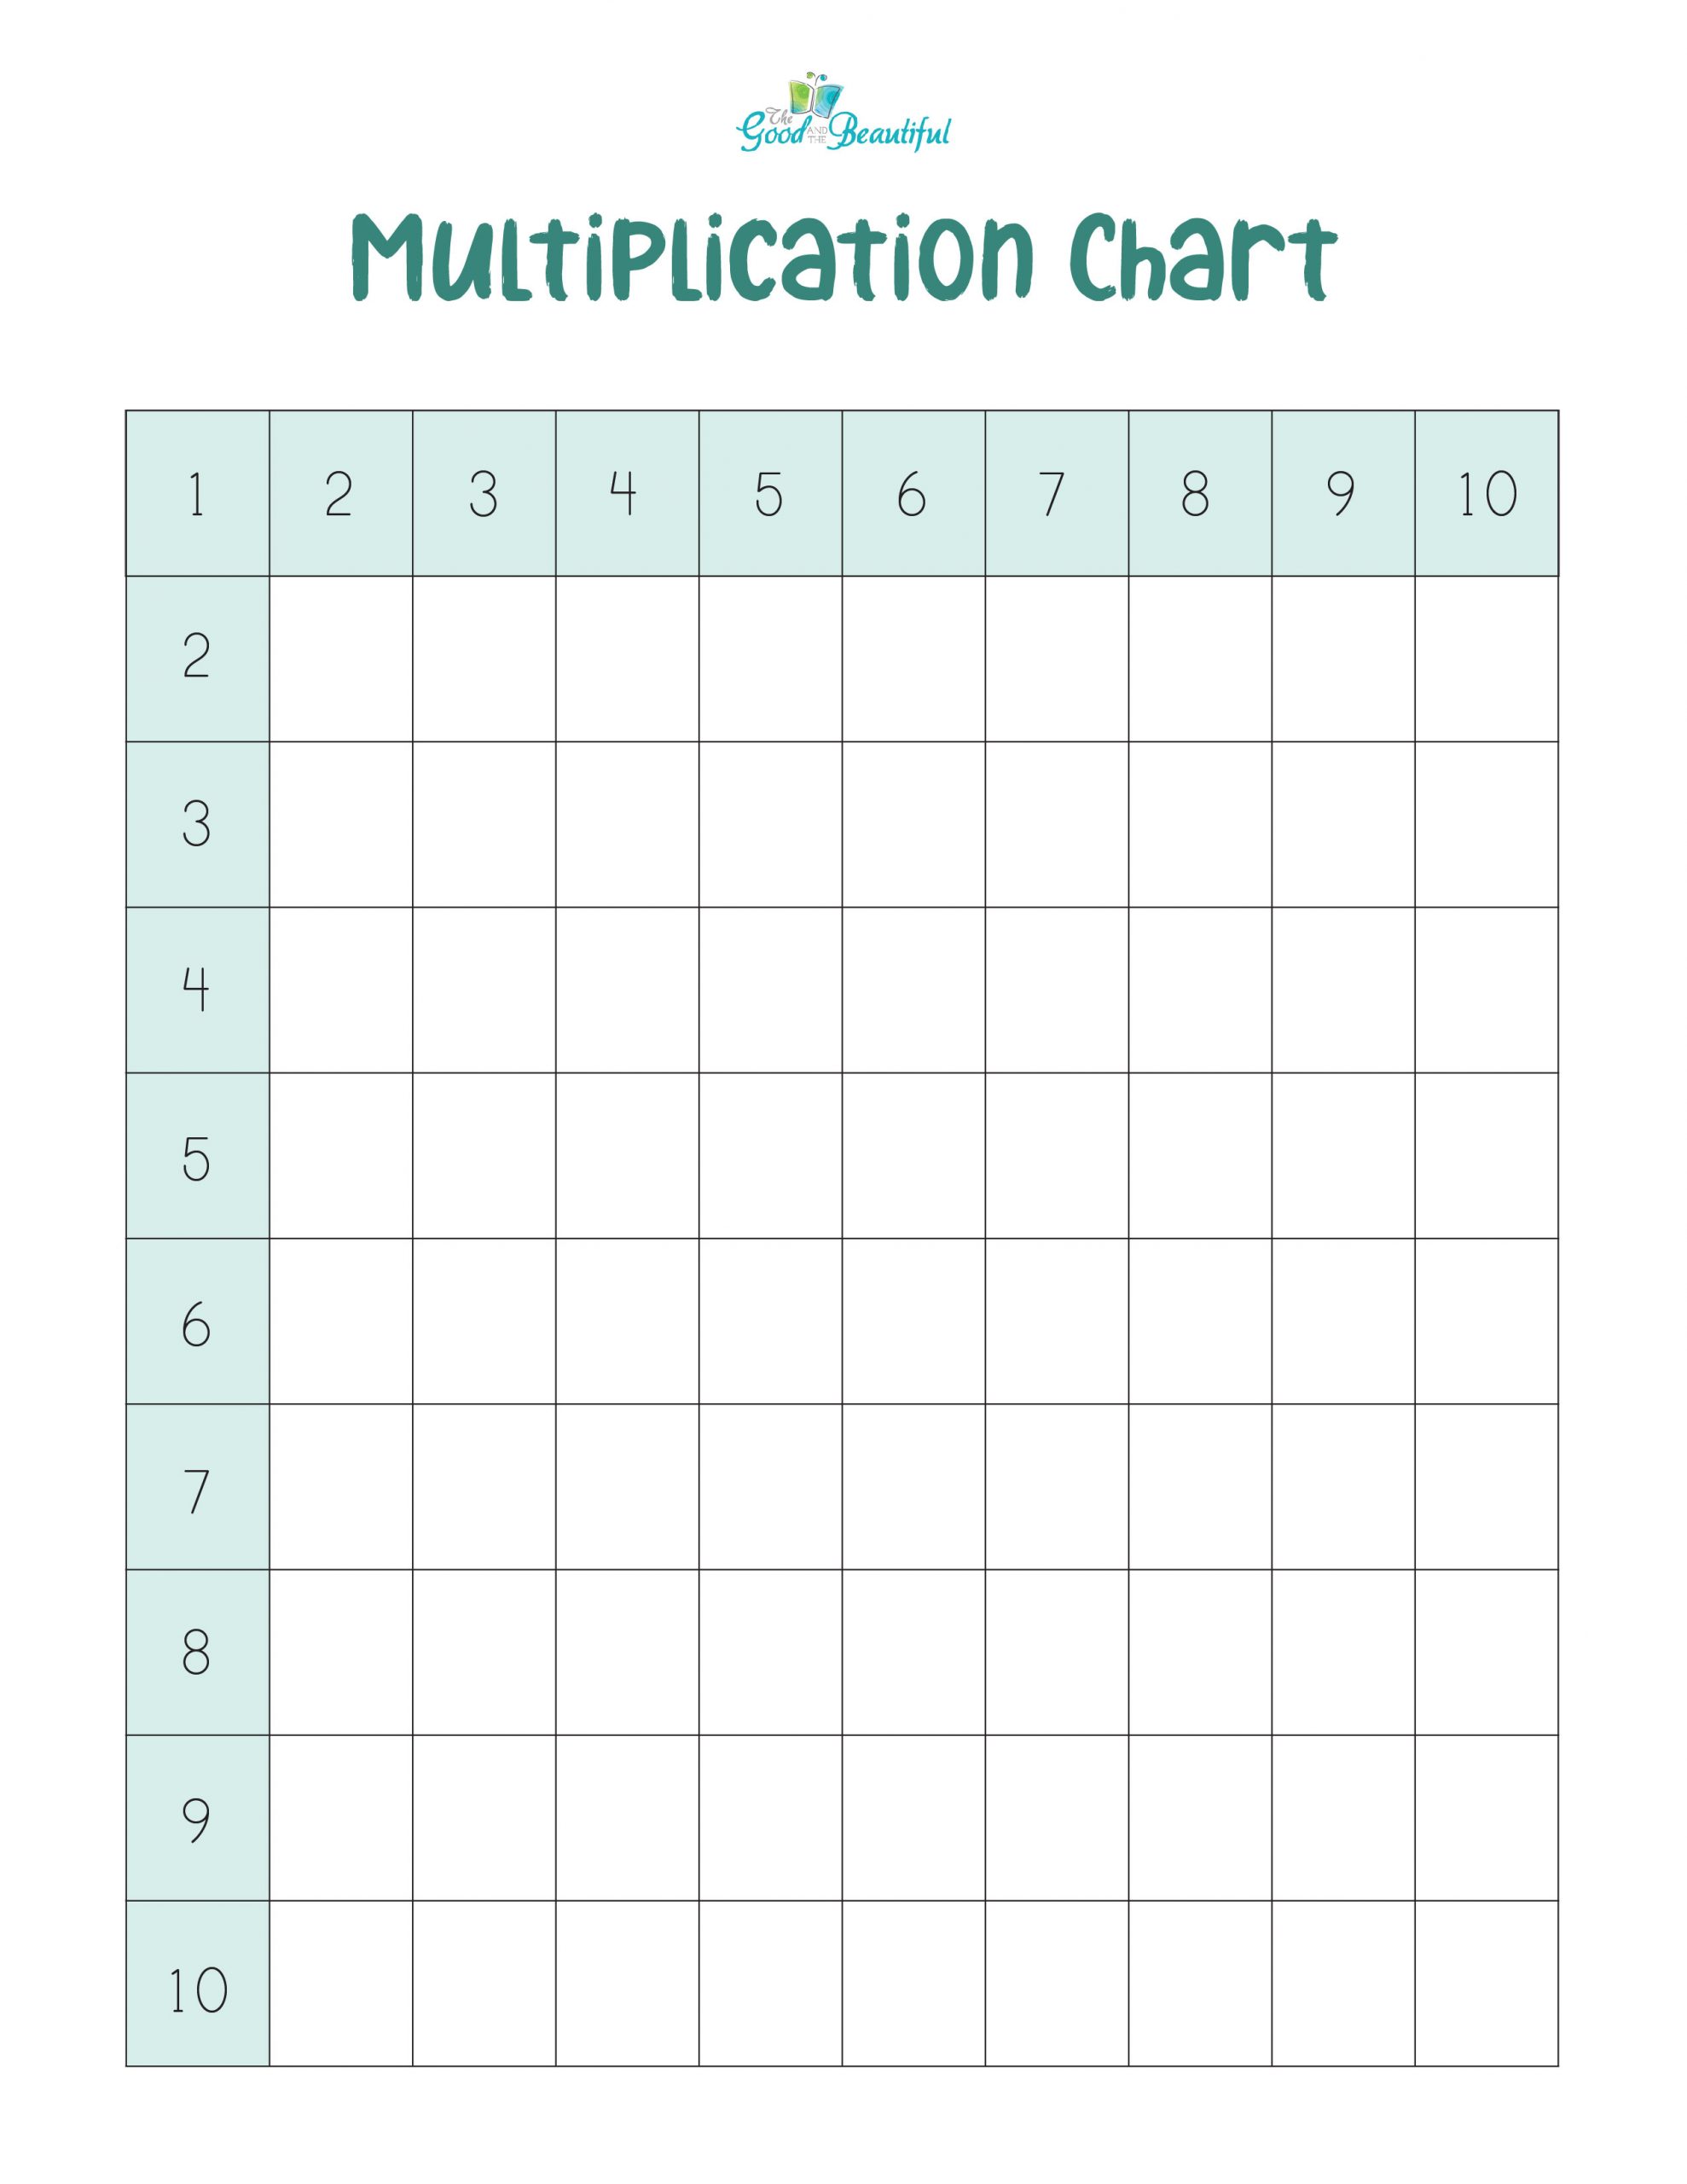 Multiplication Chart Printable - The Good and the Beautiful